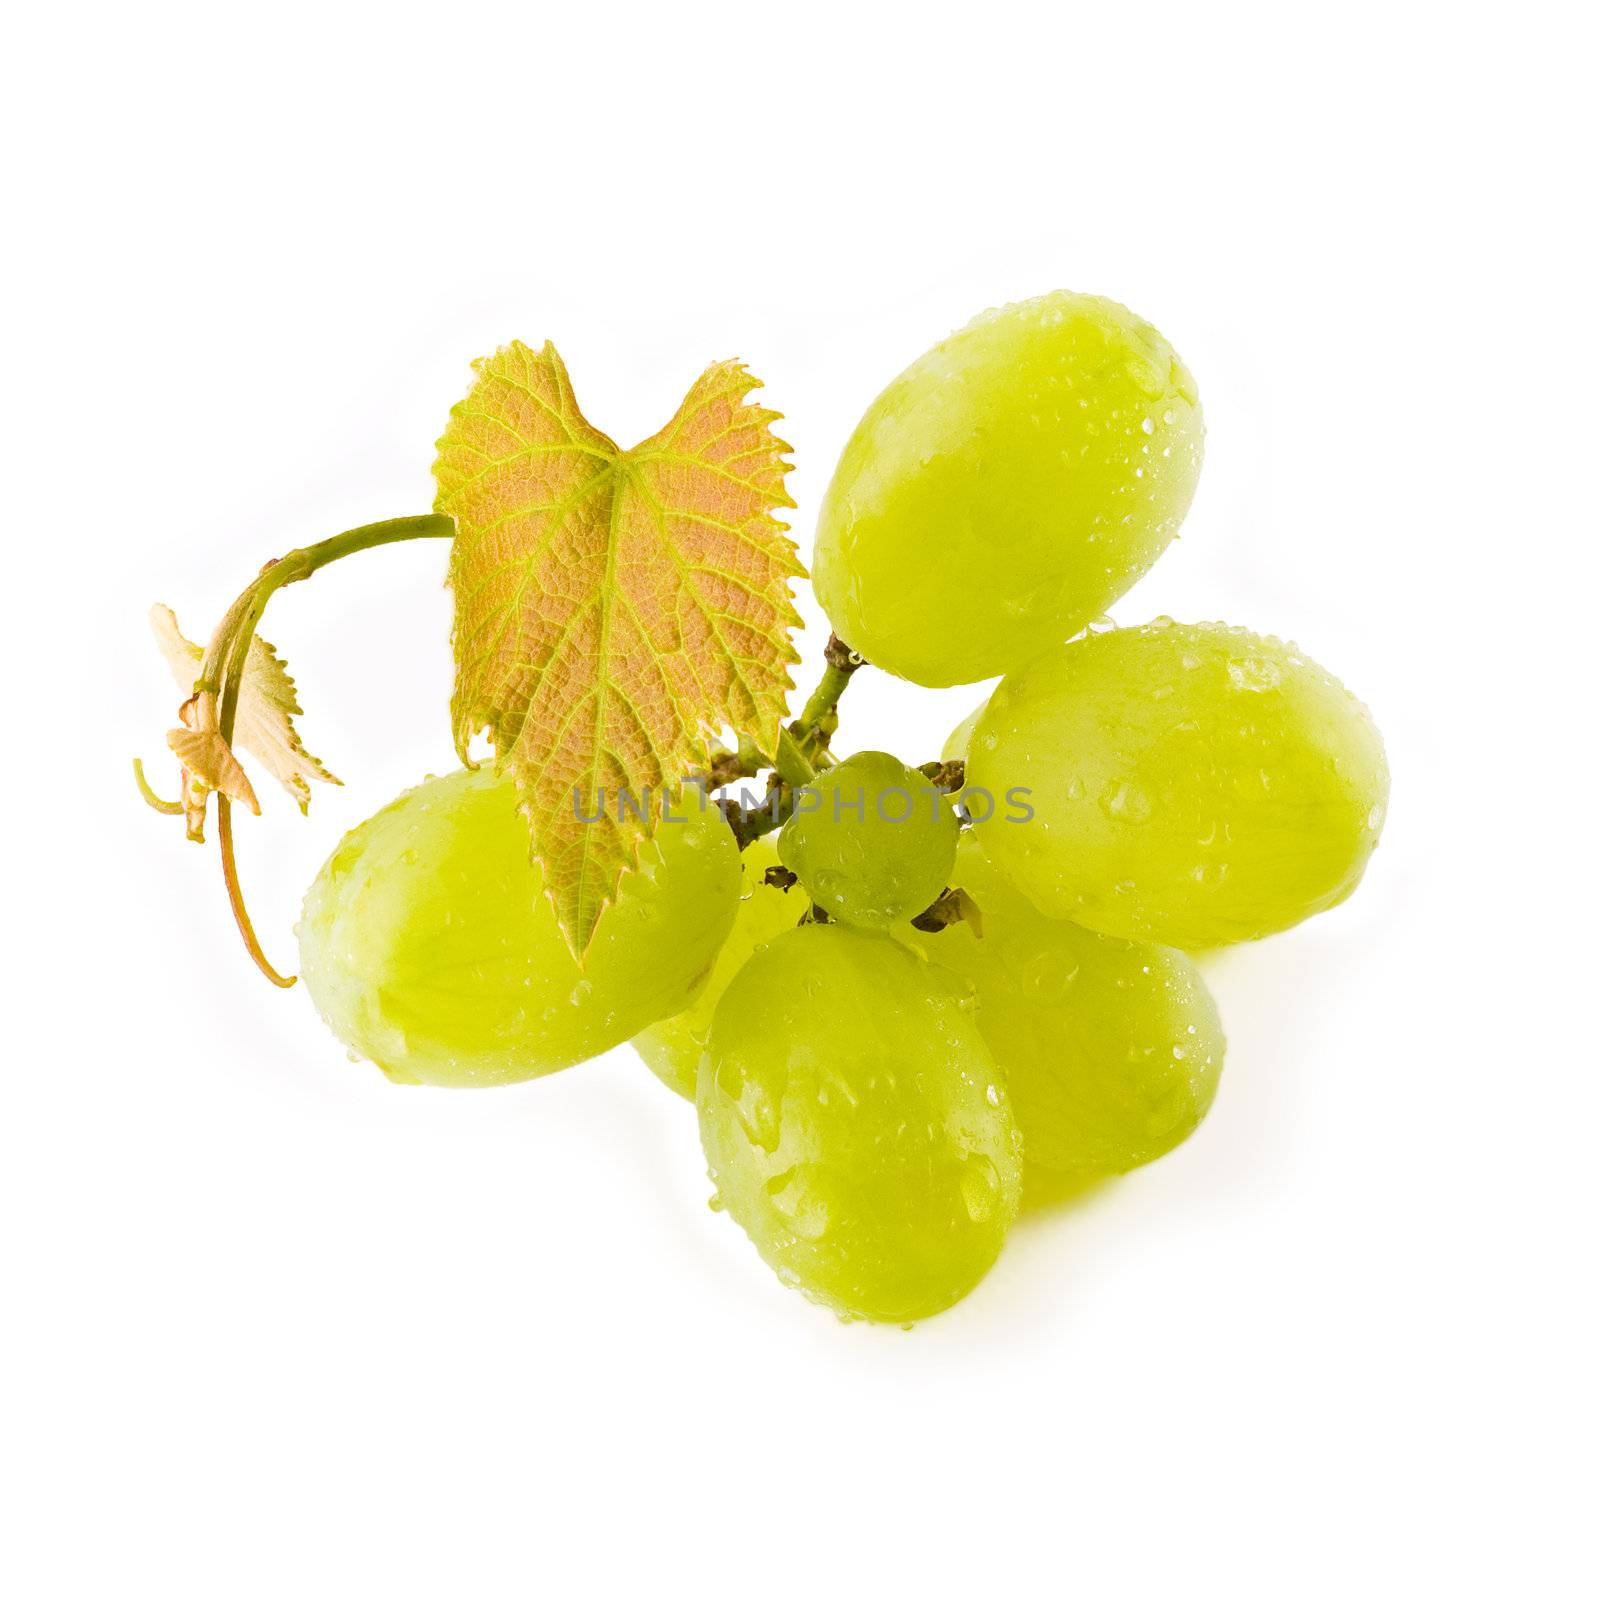 Small bunch of green grapes isolated on white